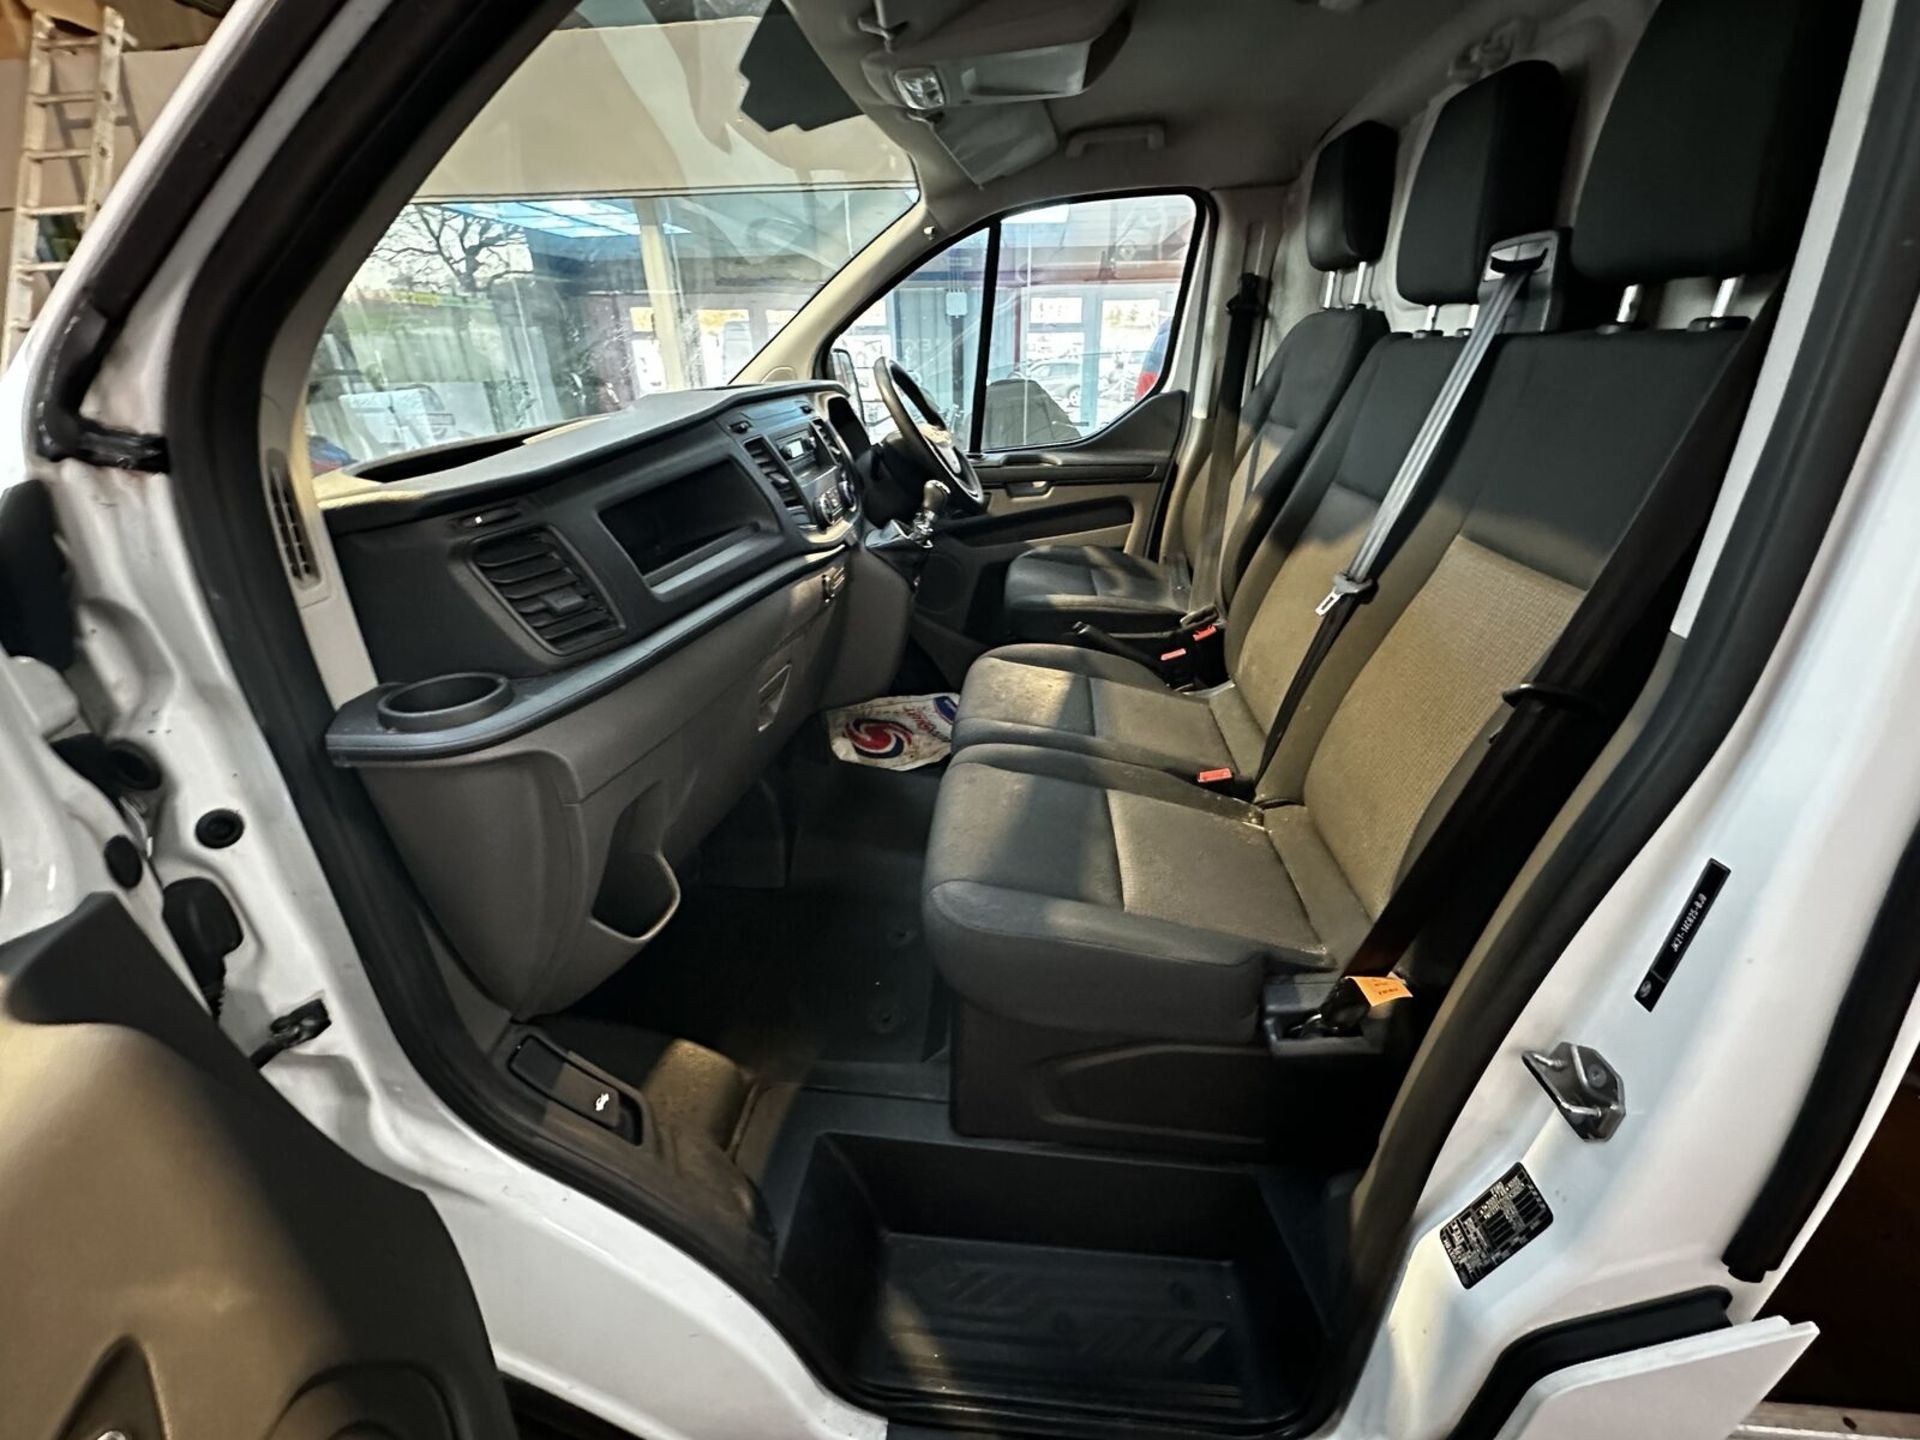 WHITE RHINO: 2019 FORD TRANSIT CUSTOM 300 - CLEAN, RELIABLE WORKHORSE - Image 9 of 12